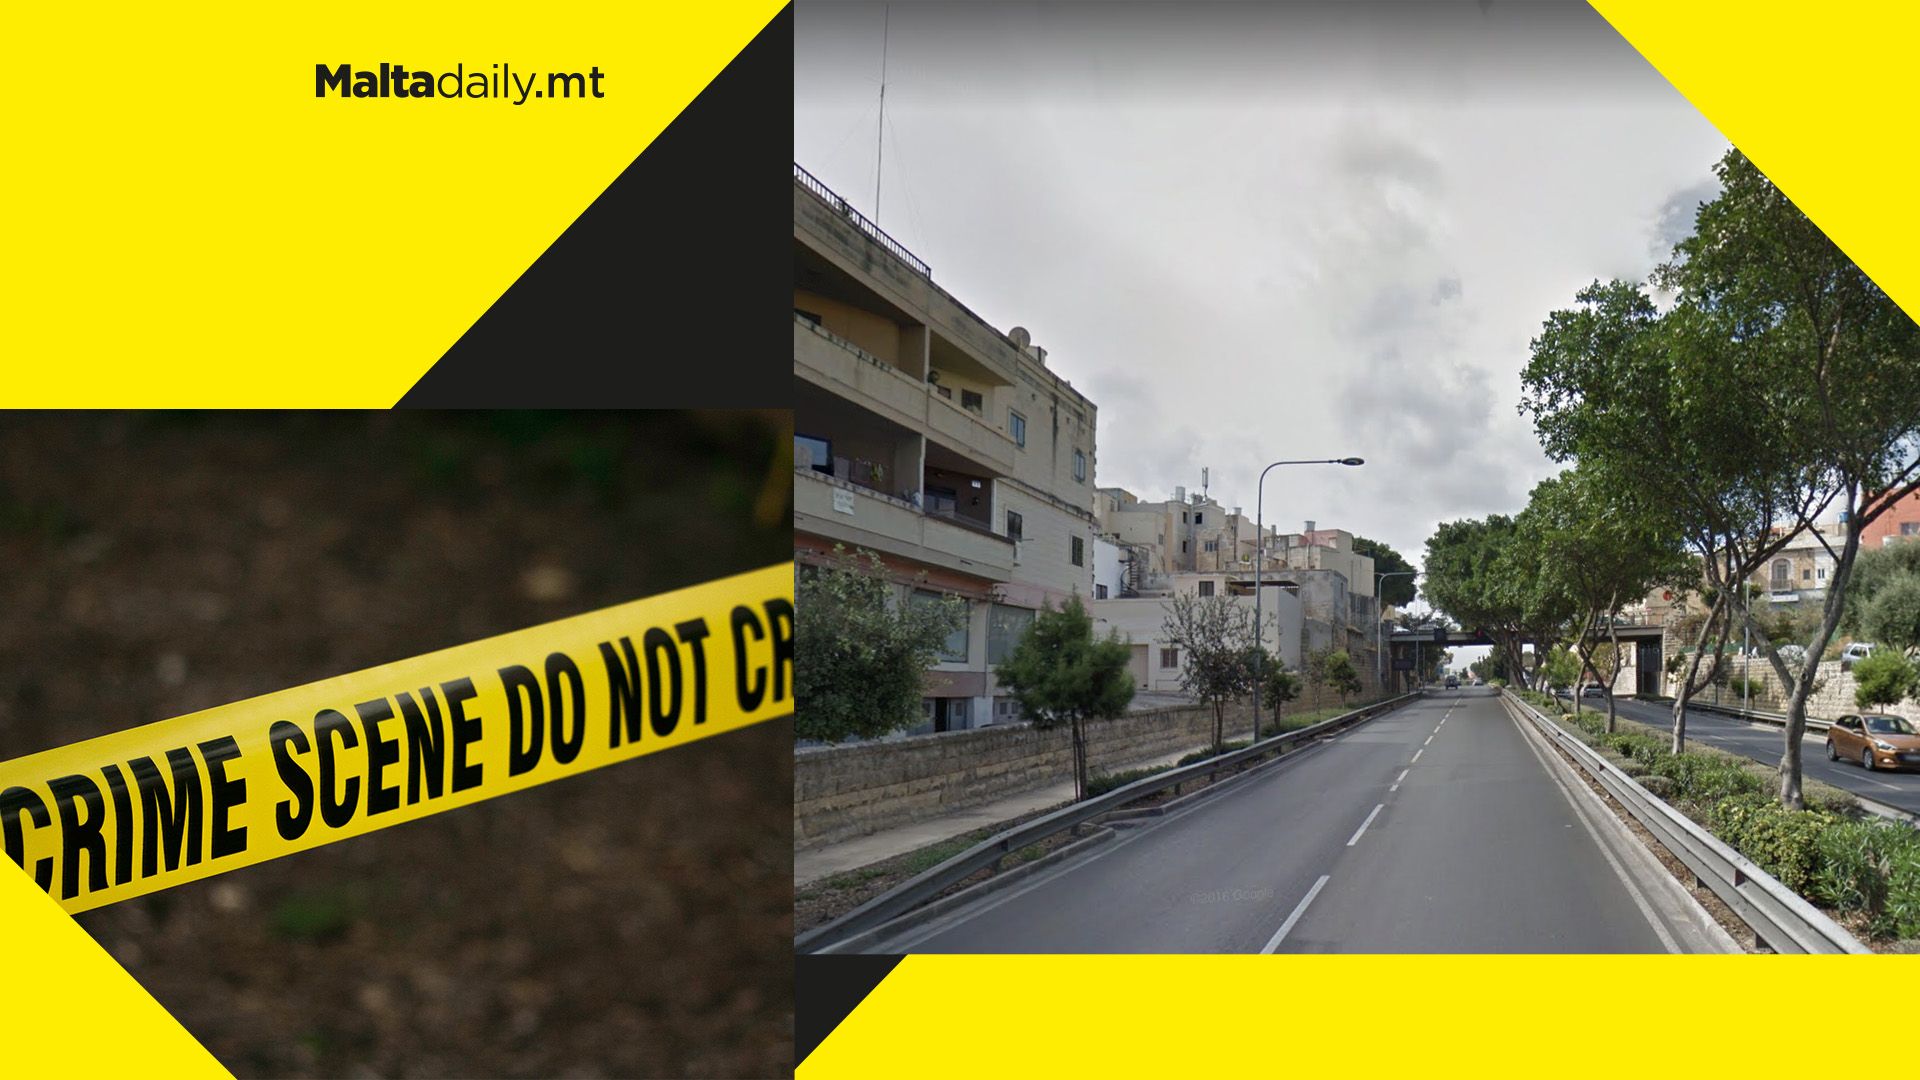 Man sustains serious injuries after being attacked with sharp object in Marsa